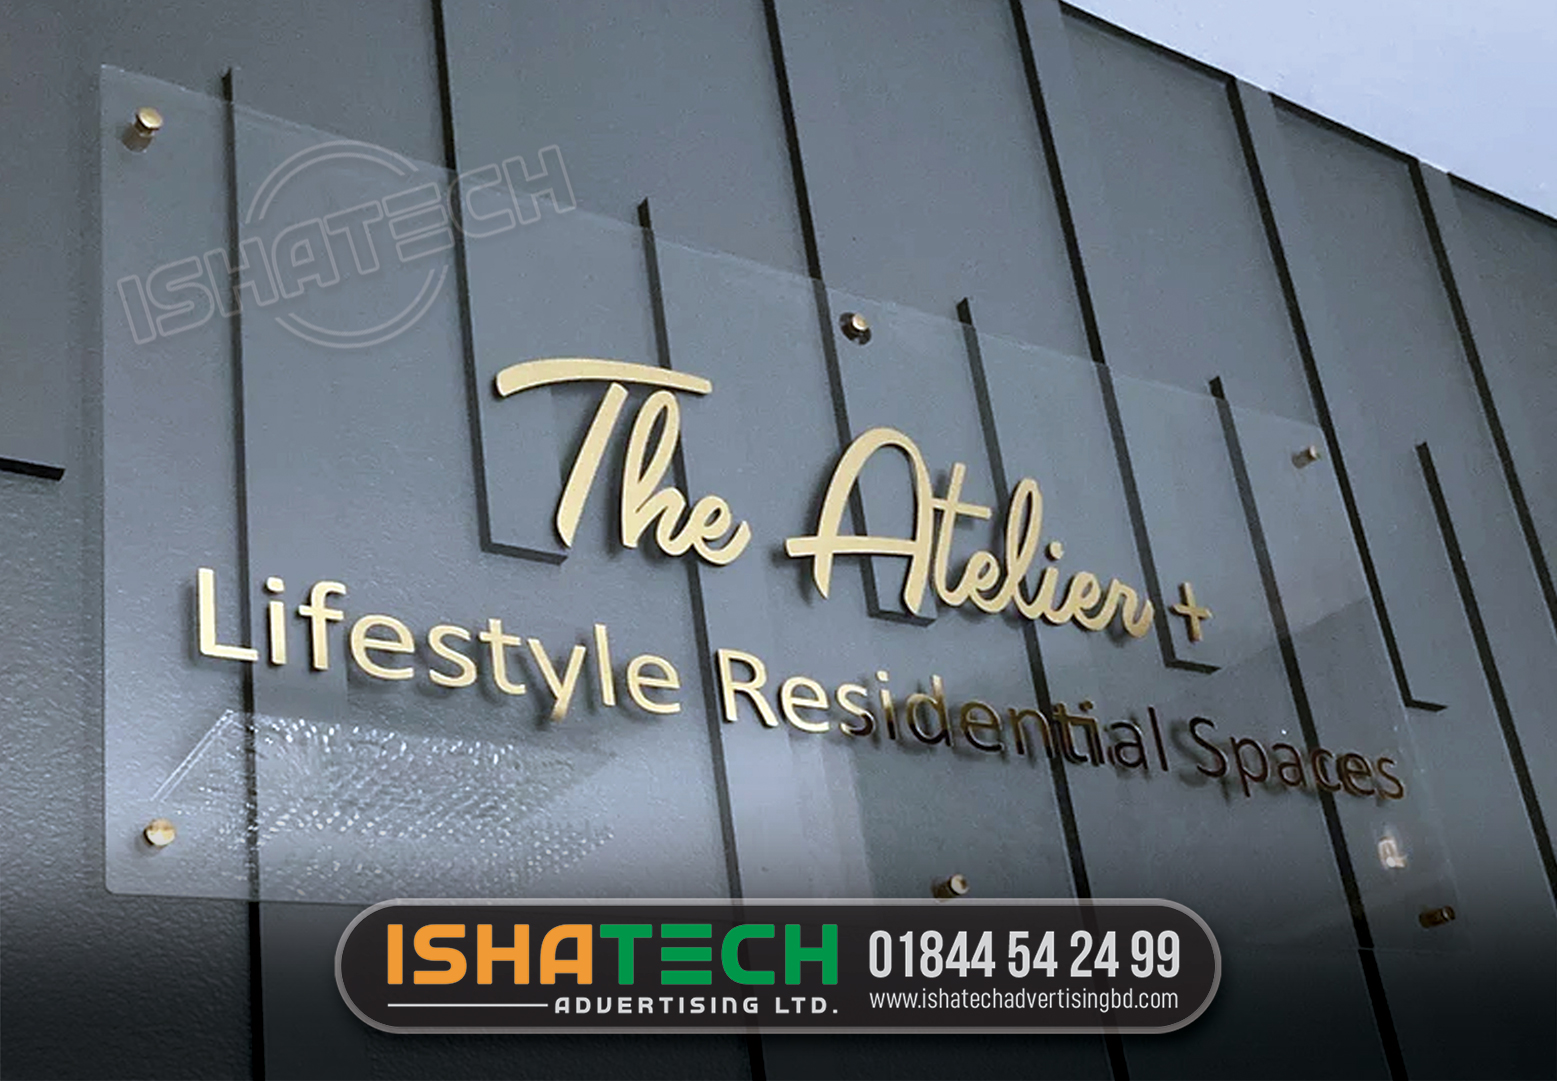 SS LETTER SIGNAGE, GOLDEN LETTER, THE ATELIENT LIFE STYLE RESIDENCIAL SPARTS, 3D GOLDEN AND SS LETTER SIGNAGE AGENCY IN DHAKA BANGLADESH